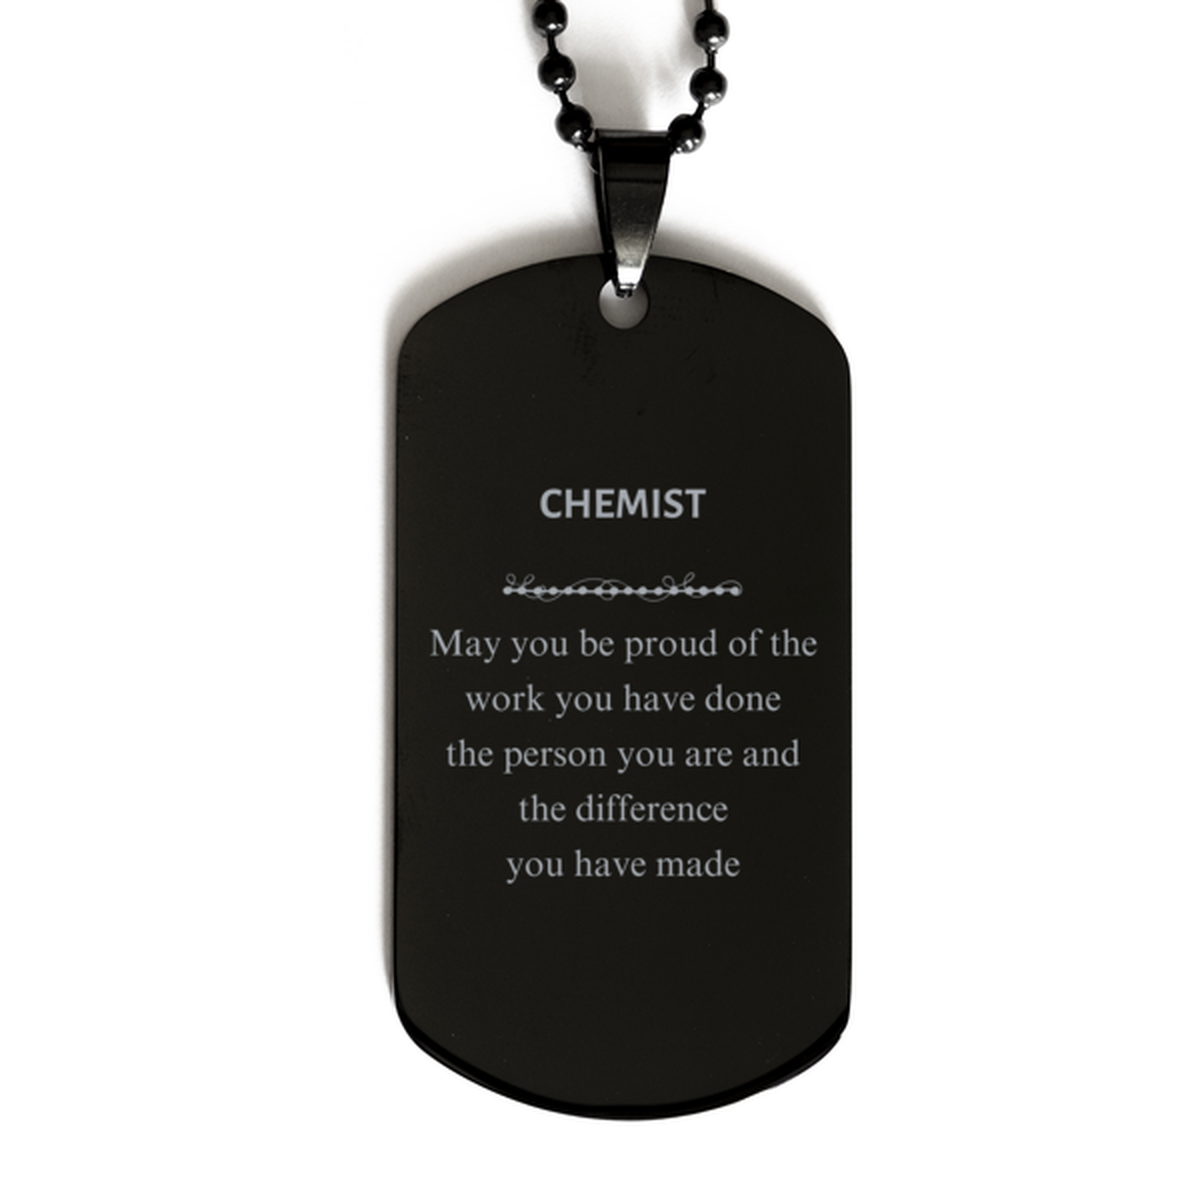 Chemist May you be proud of the work you have done, Retirement Chemist Black Dog Tag for Colleague Appreciation Gifts Amazing for Chemist